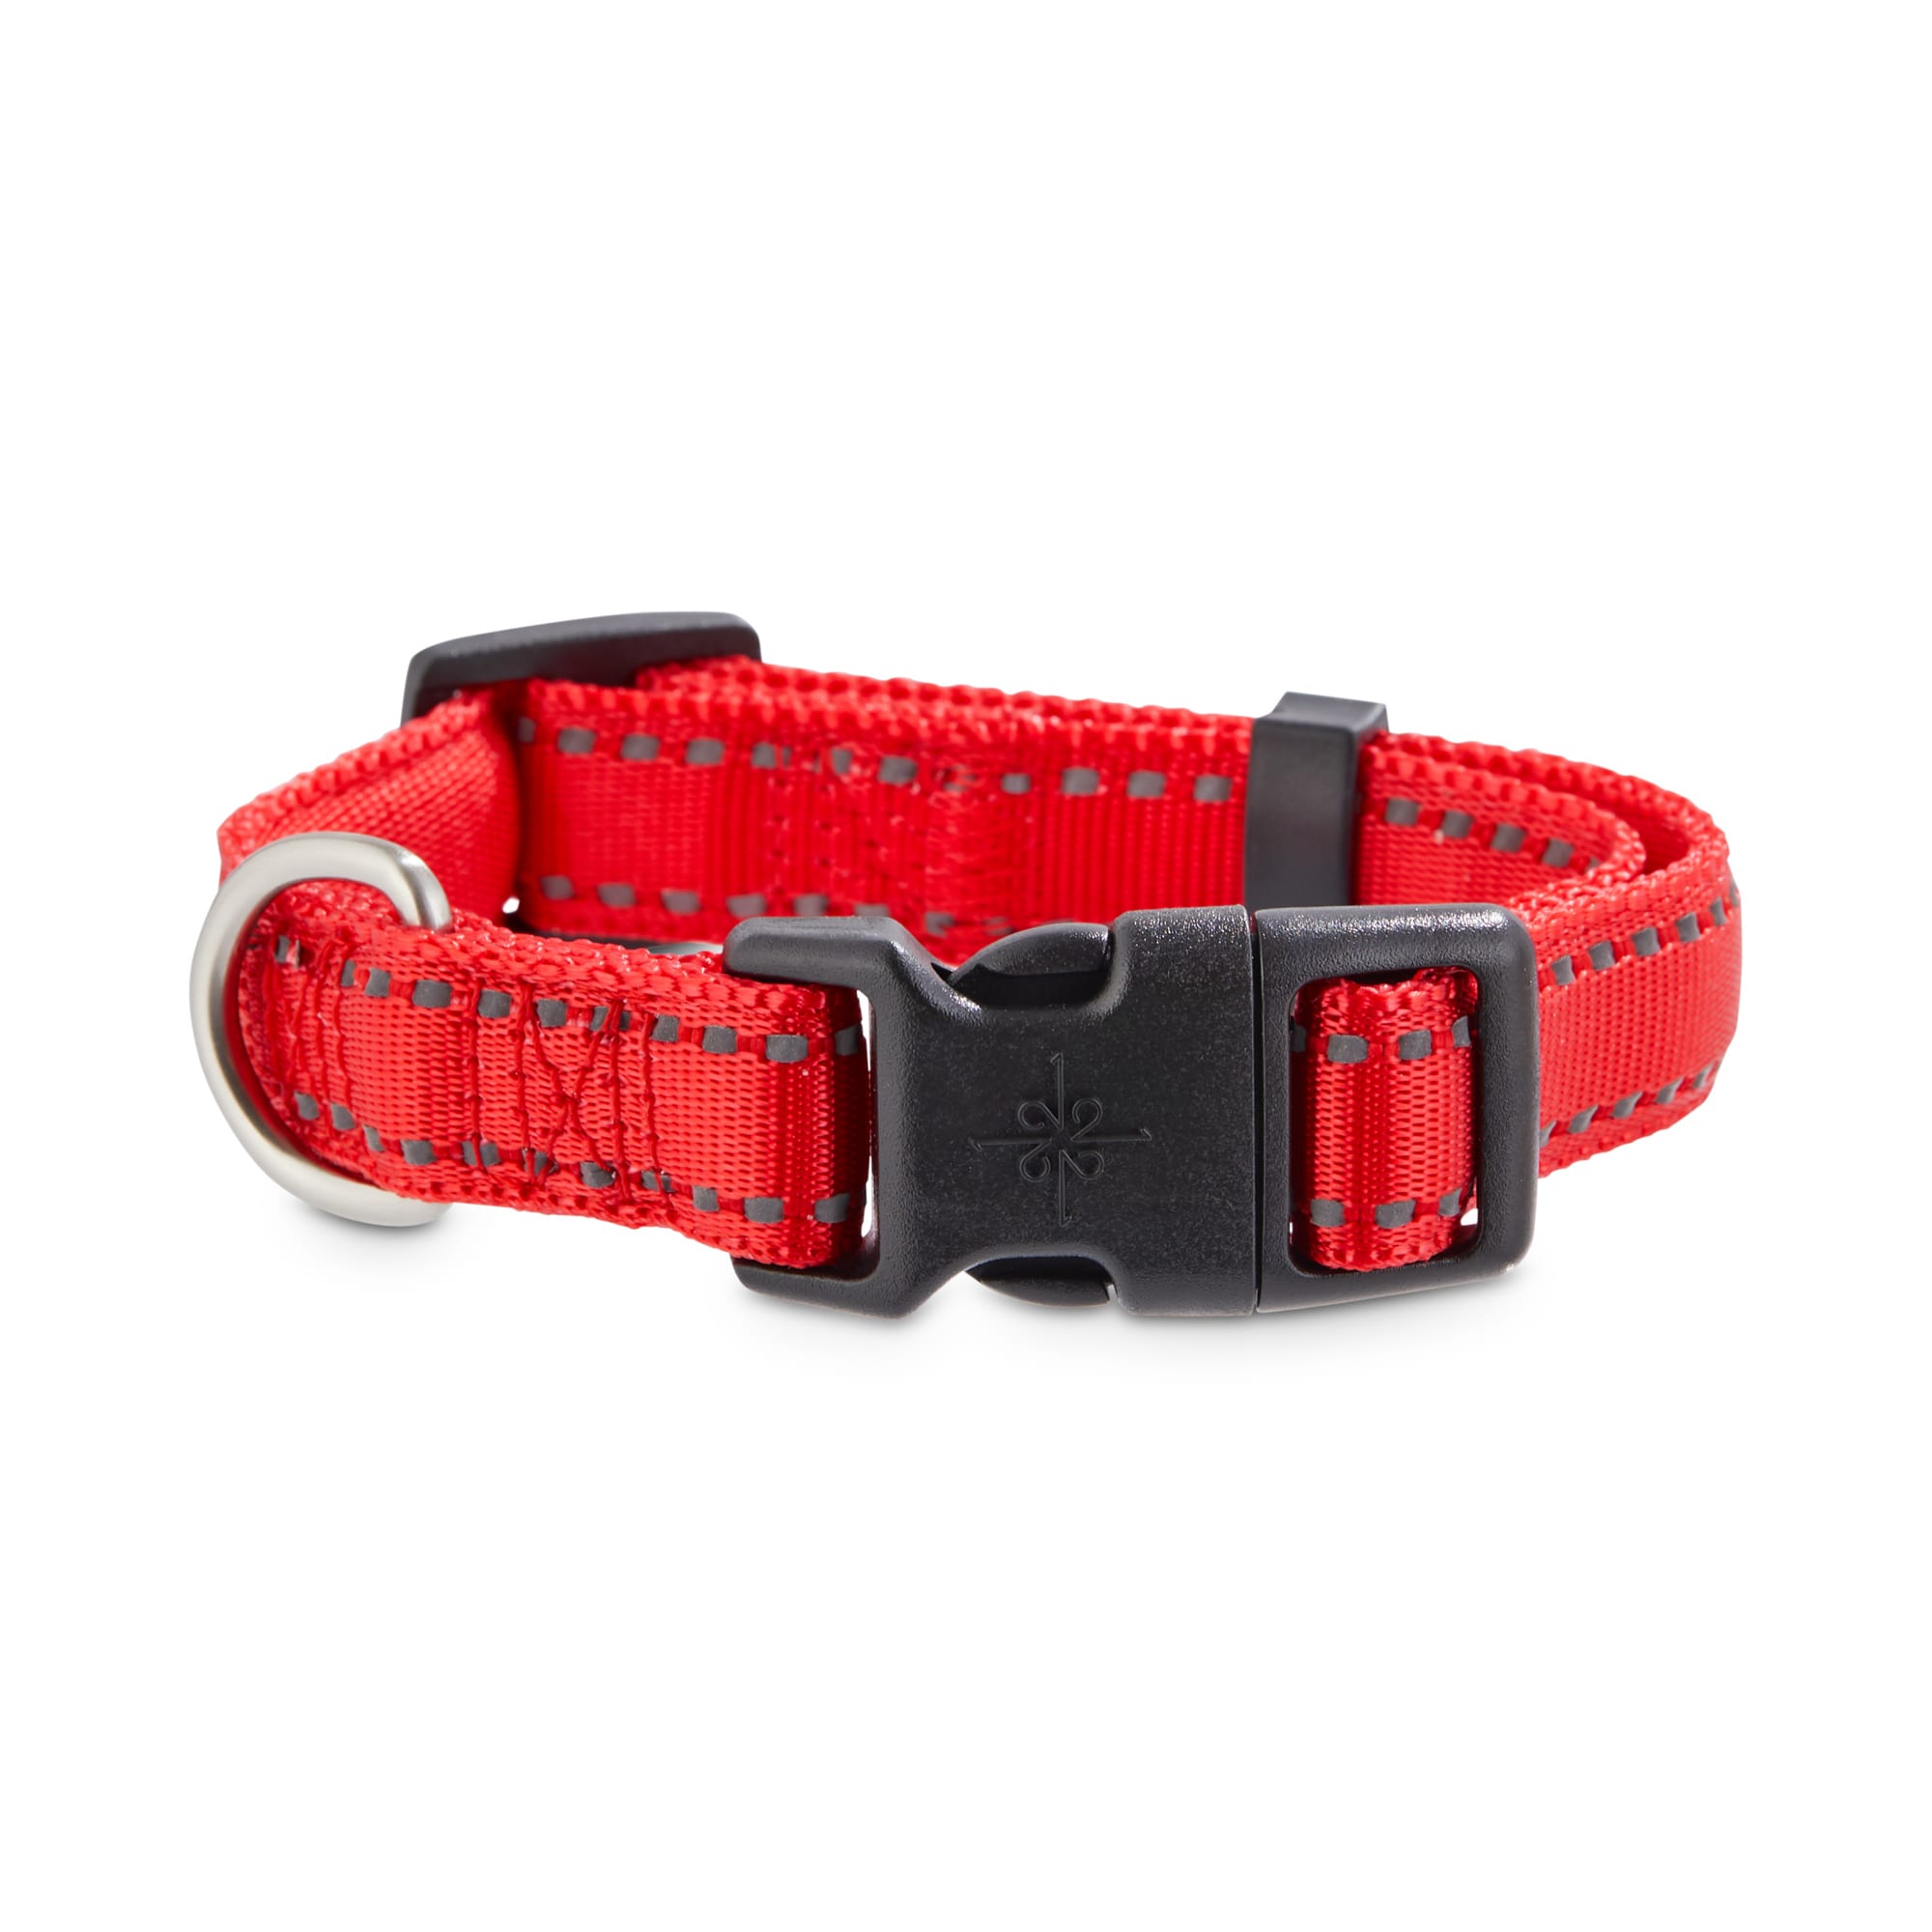 RED DİOR DOG COLLAR. 🐶 MADE TO ORDER 🔥 LİNK İN BİO 🔥 Free and